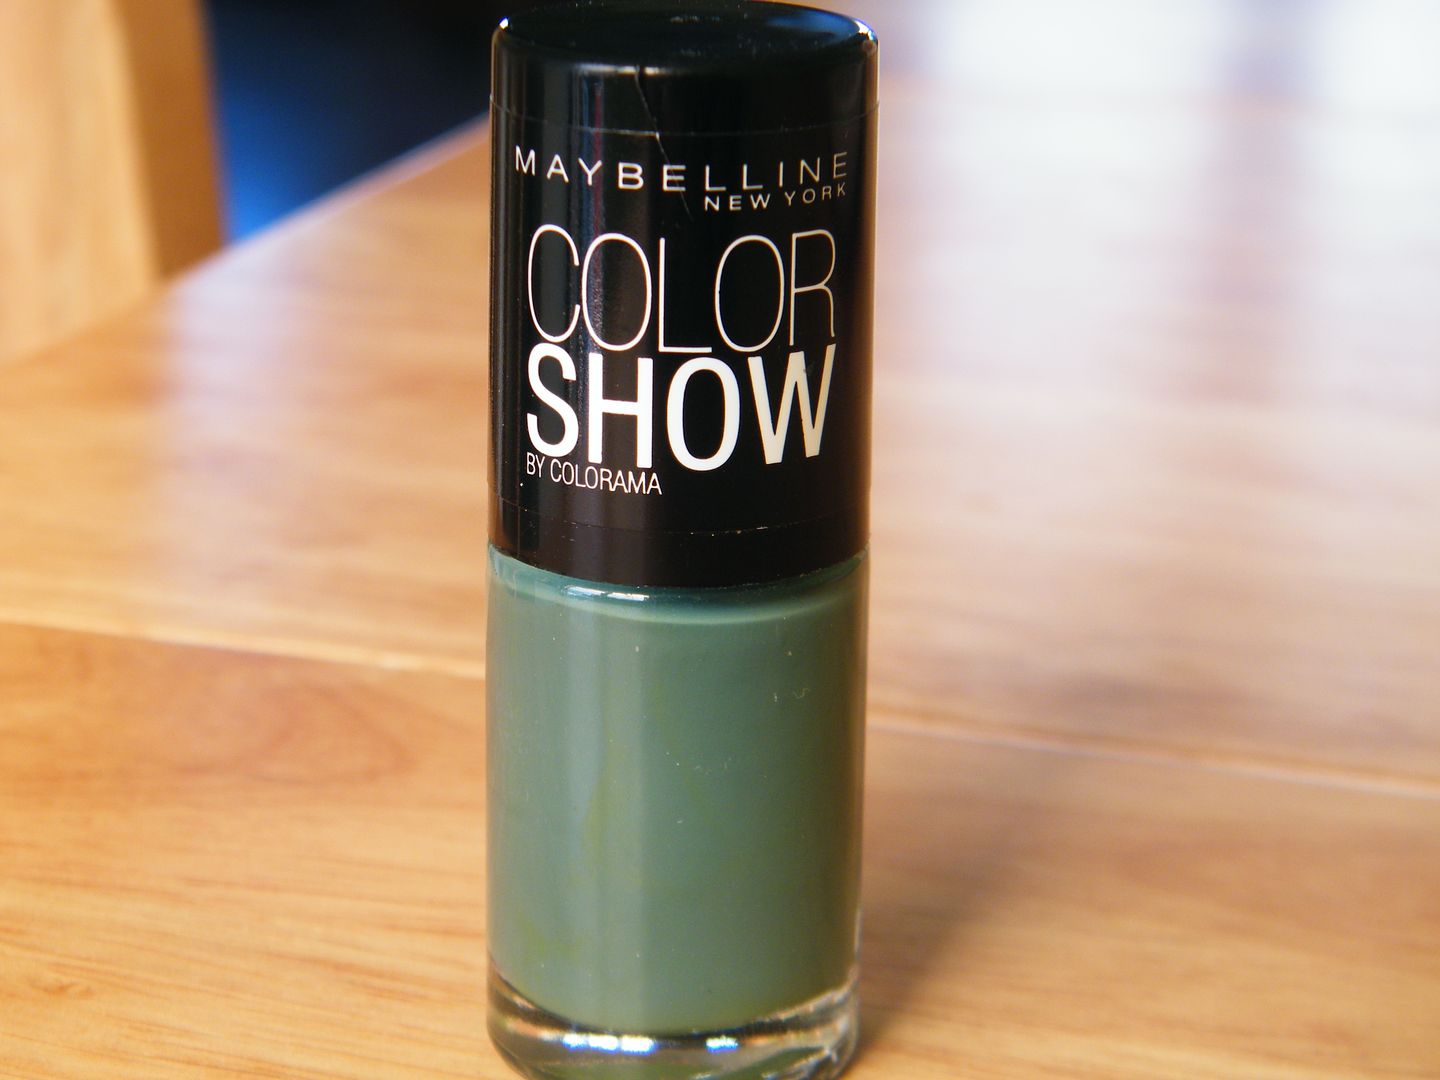 Maybelline Color Show in Moss